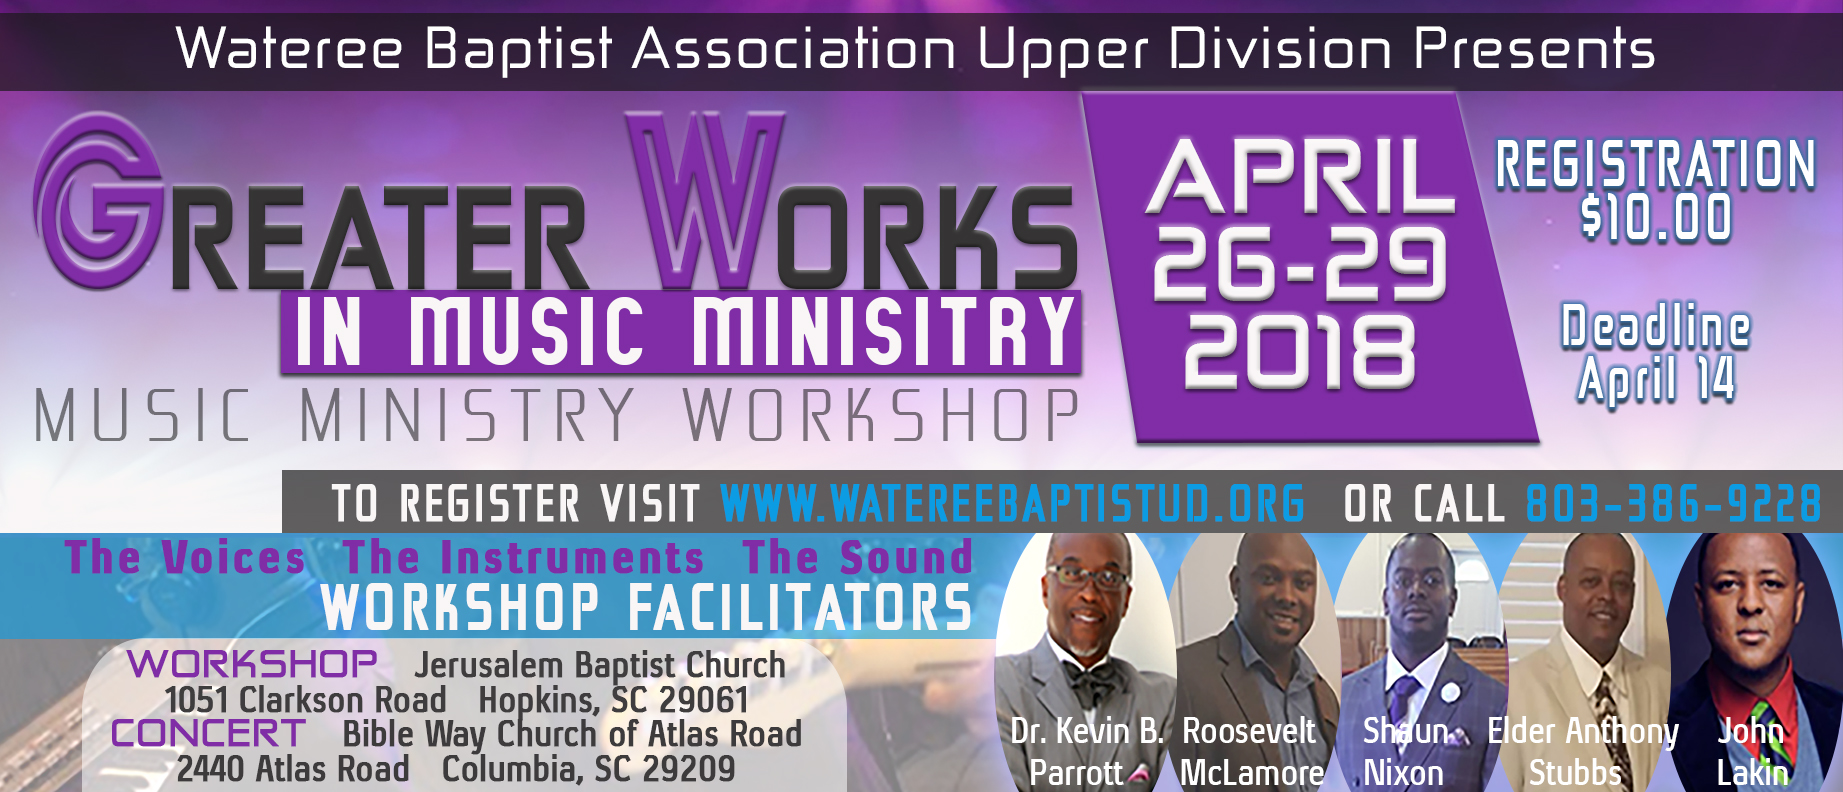 Greater Works in Music Ministry Workshop